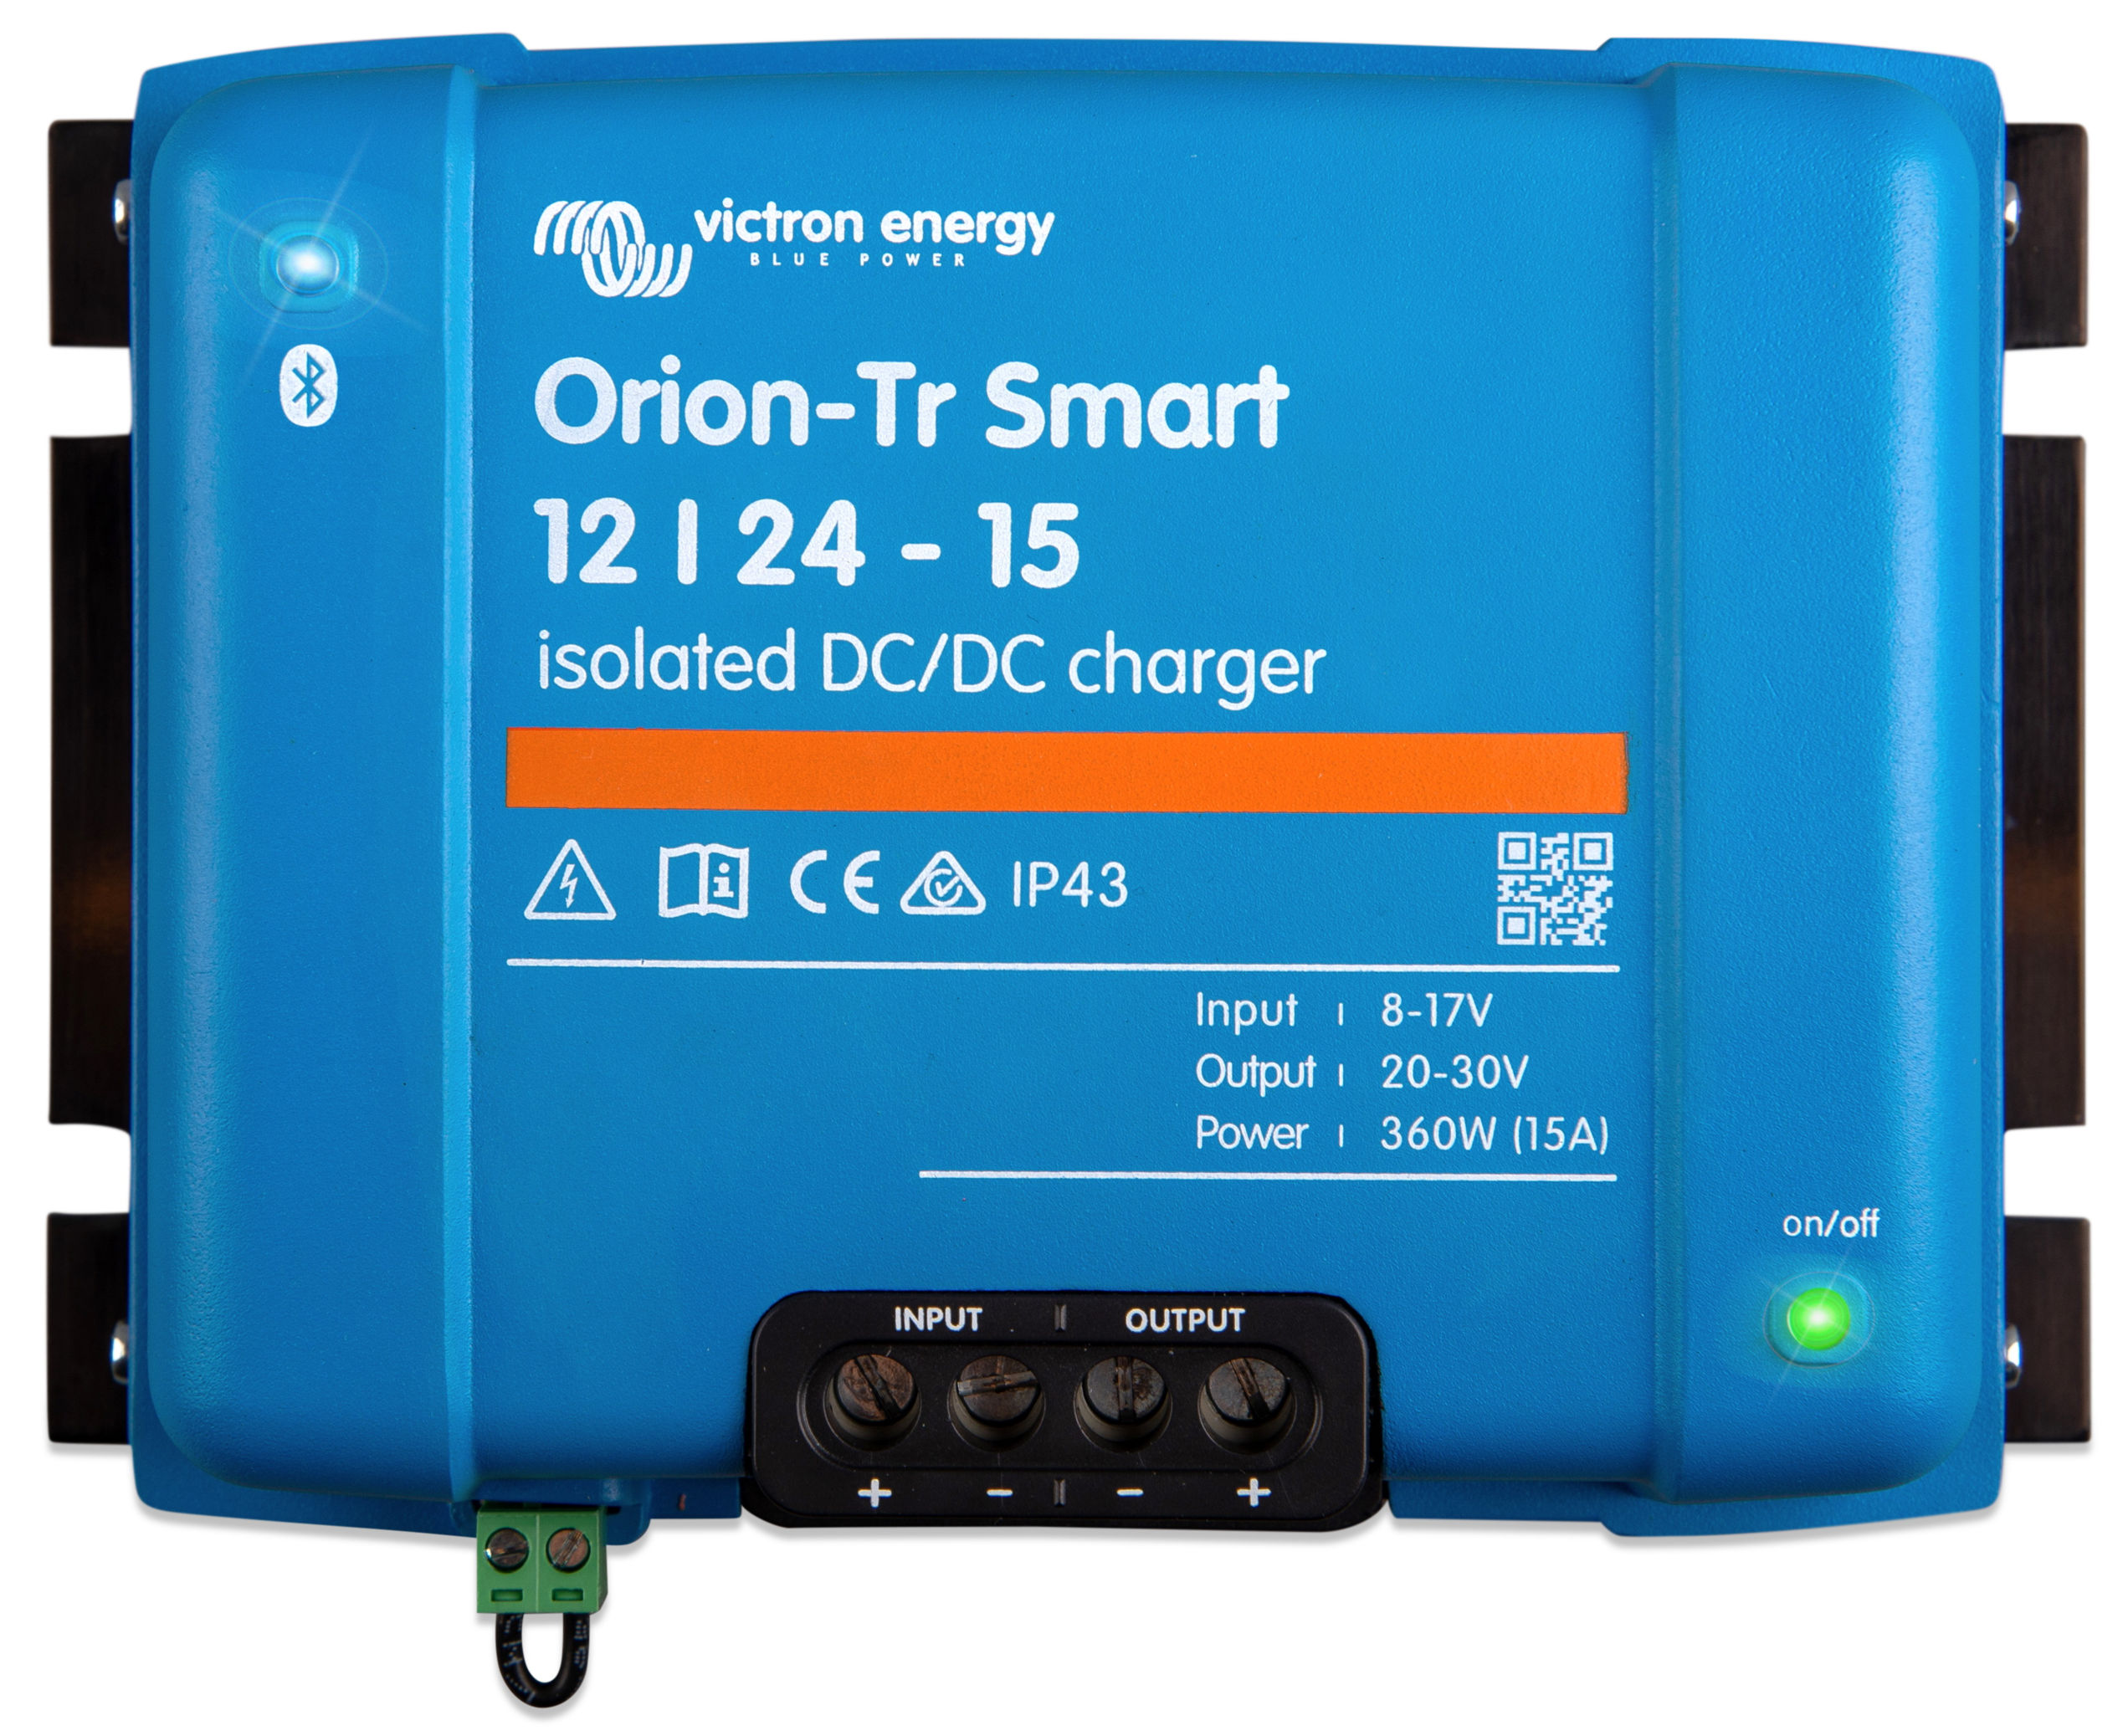 DC-DC chargers, Victron introduces Orion TR Smart series - Panbo